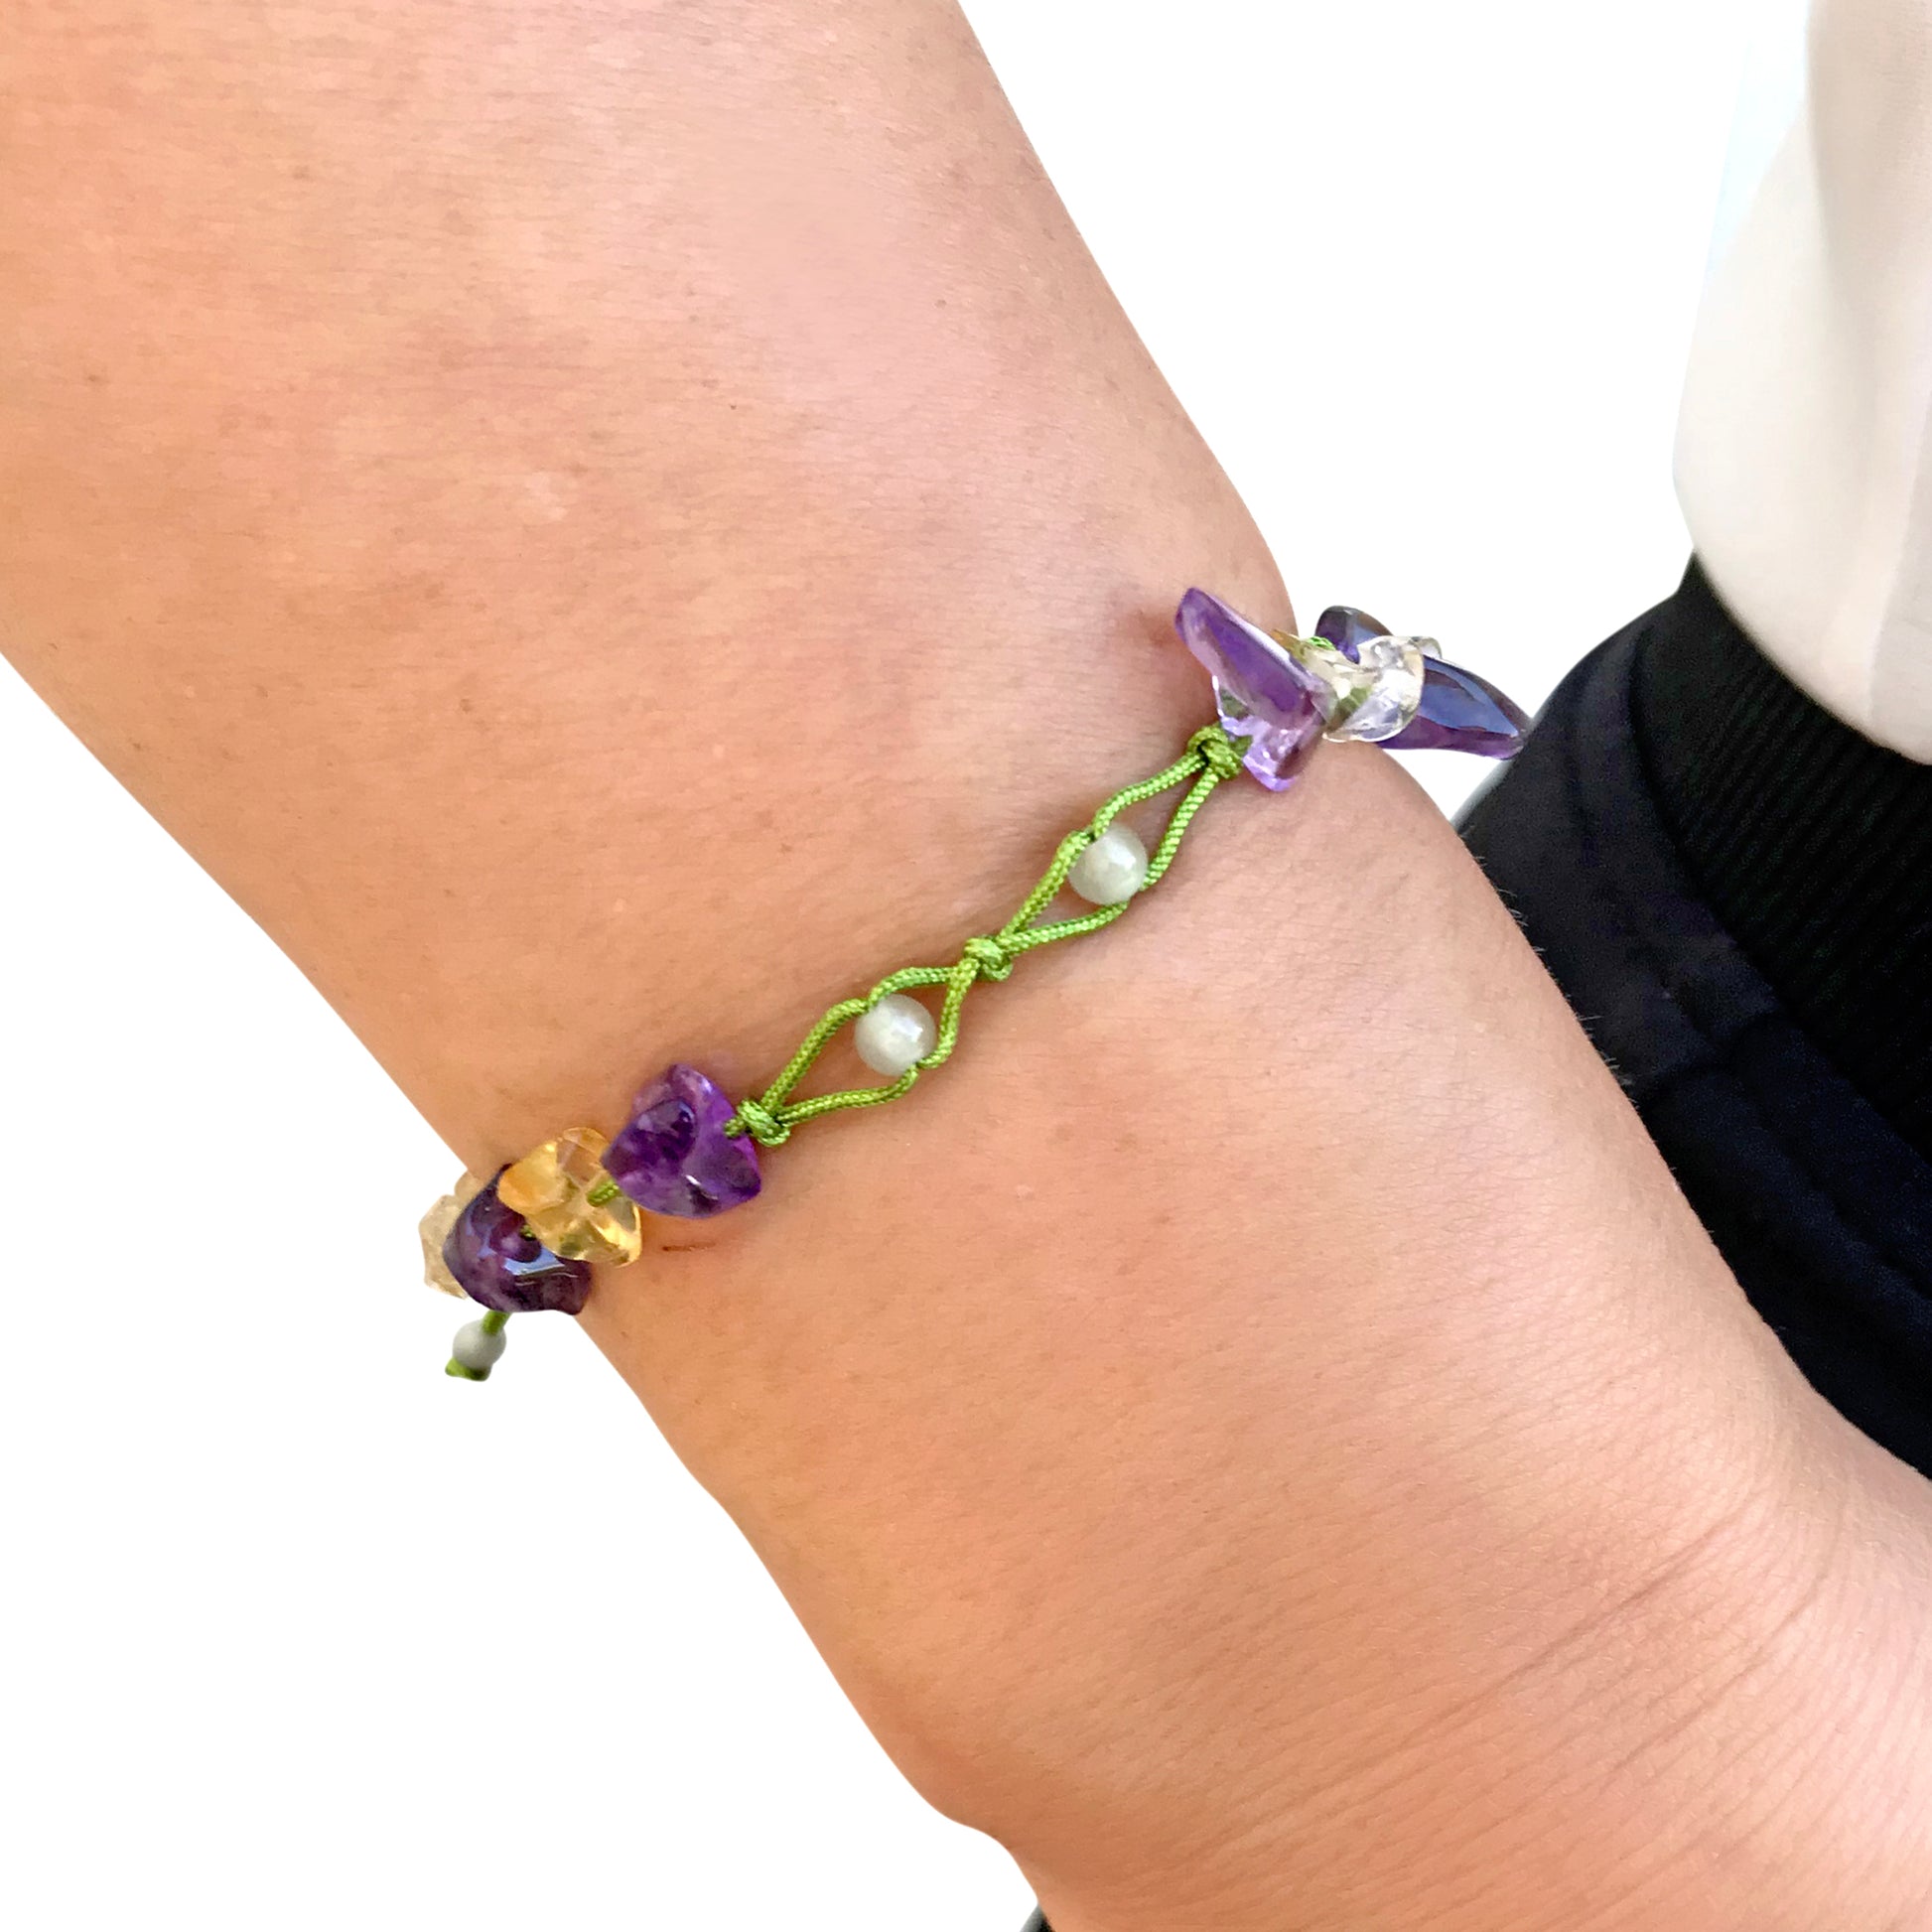 Get a Knotted Look with this Amethyst and Citrine Gemstone Bracelet